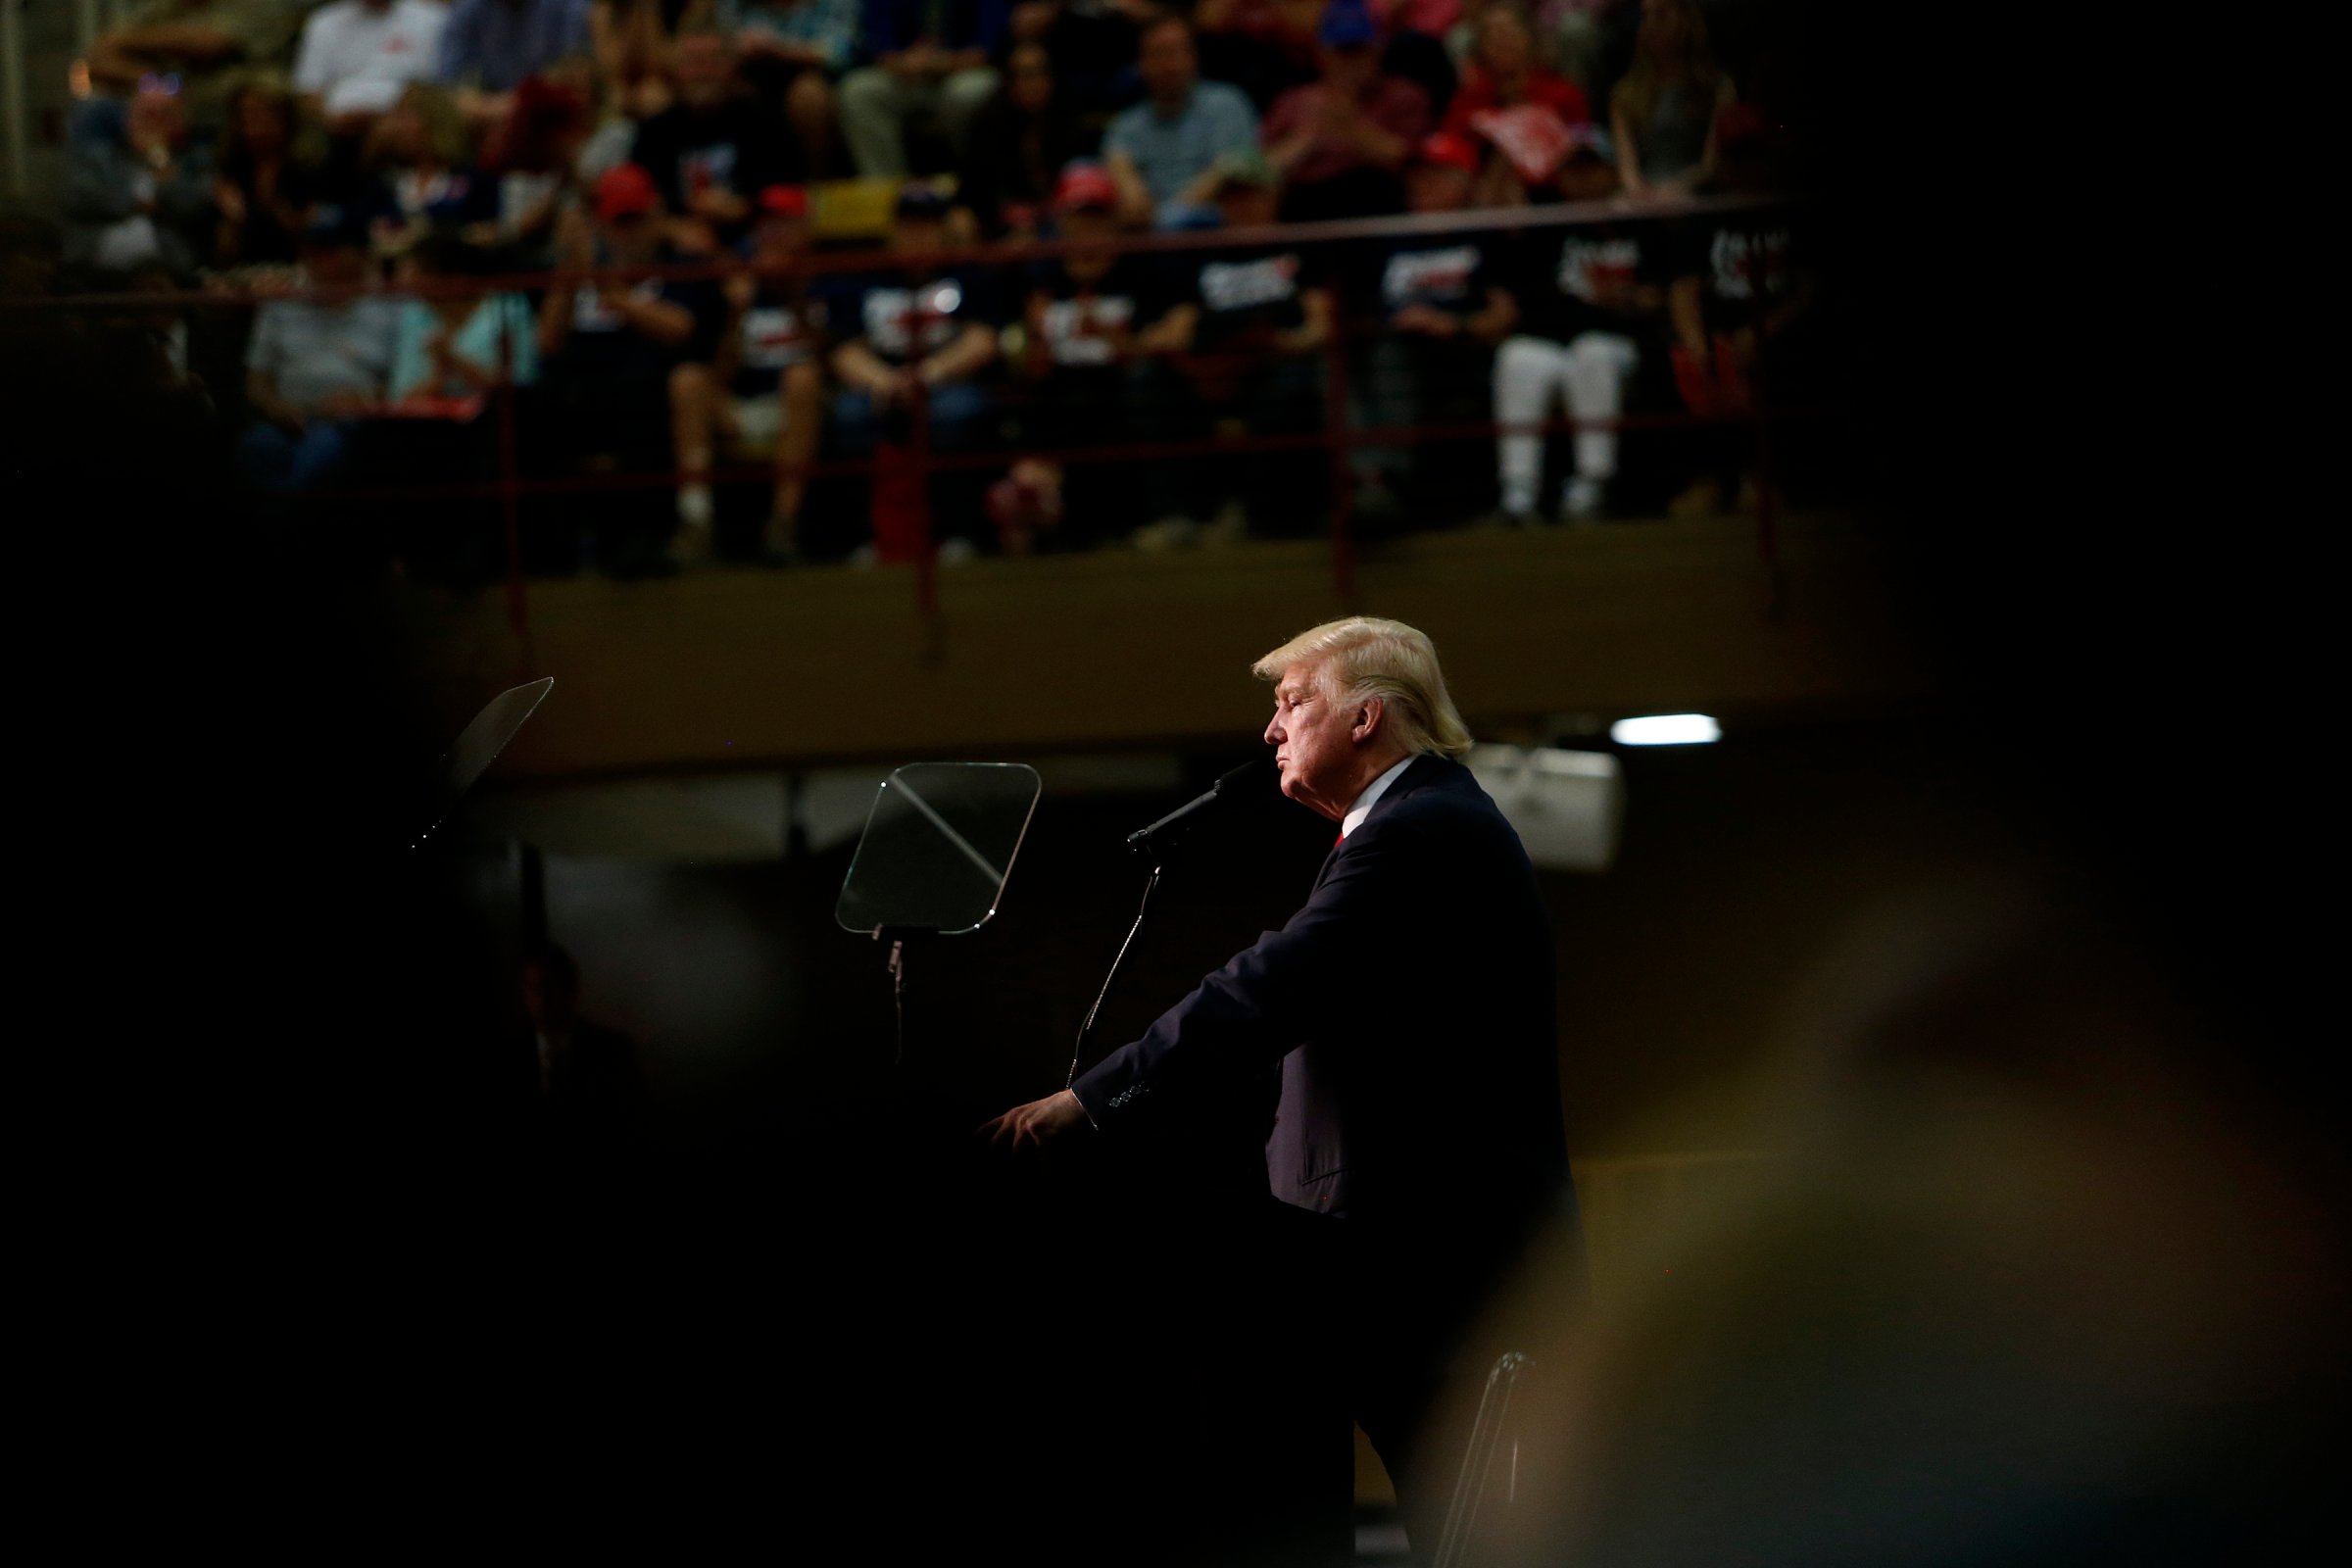 Republican presidential candidate Donald Trump speaks to supporters at a rally at U.S. Cellular Center in Asheville, N.C., on Sept. 12, 2016.